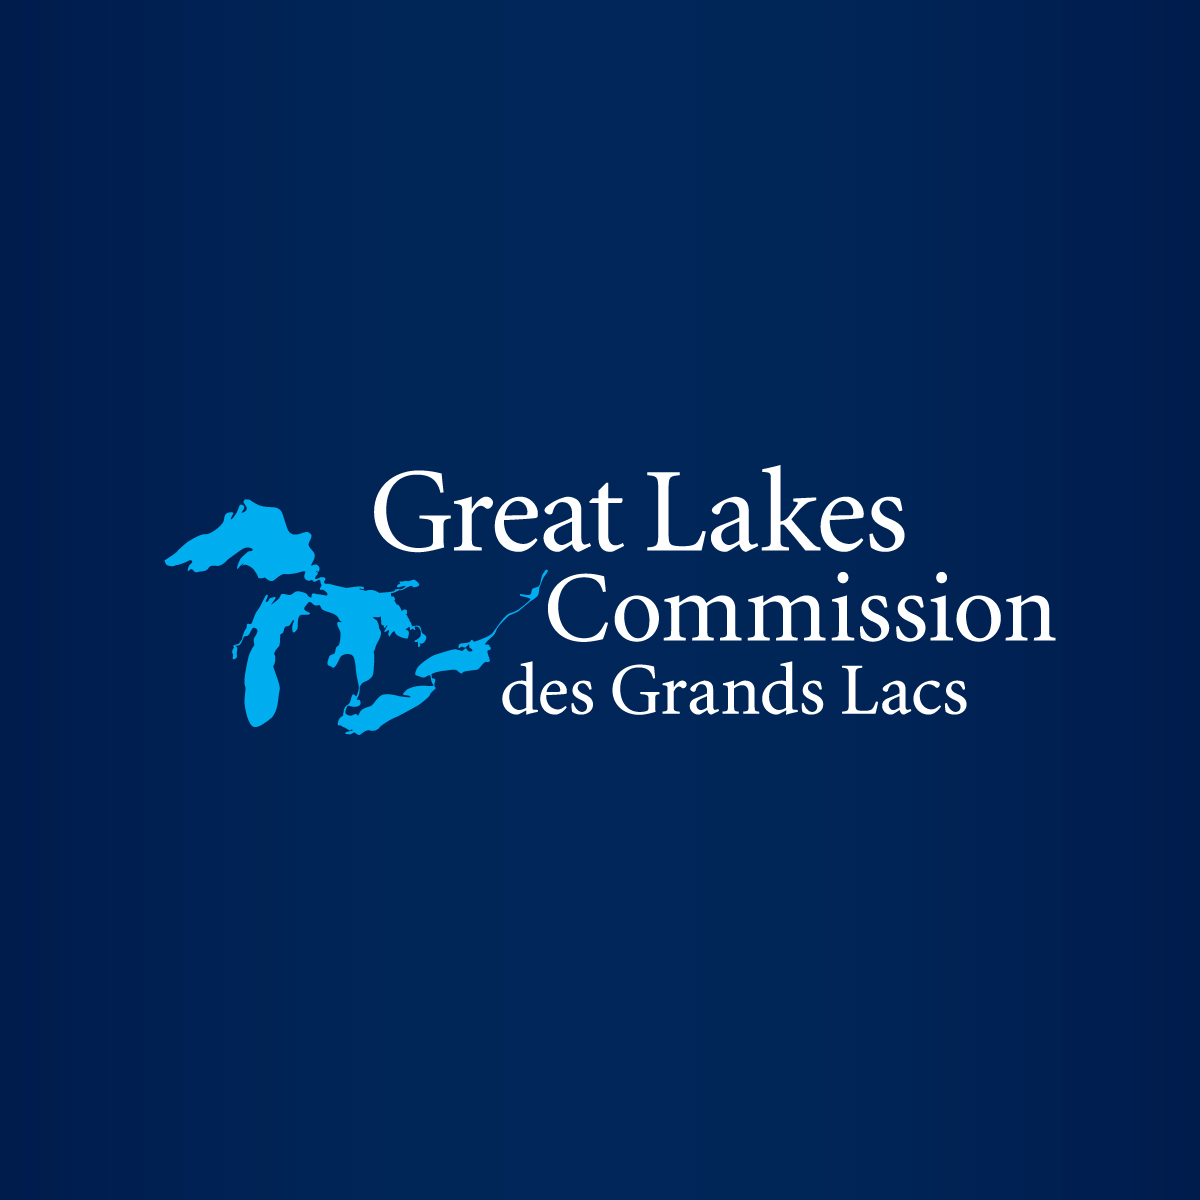 nominated coast guard commandant voices support for new ice breaker on great lakes